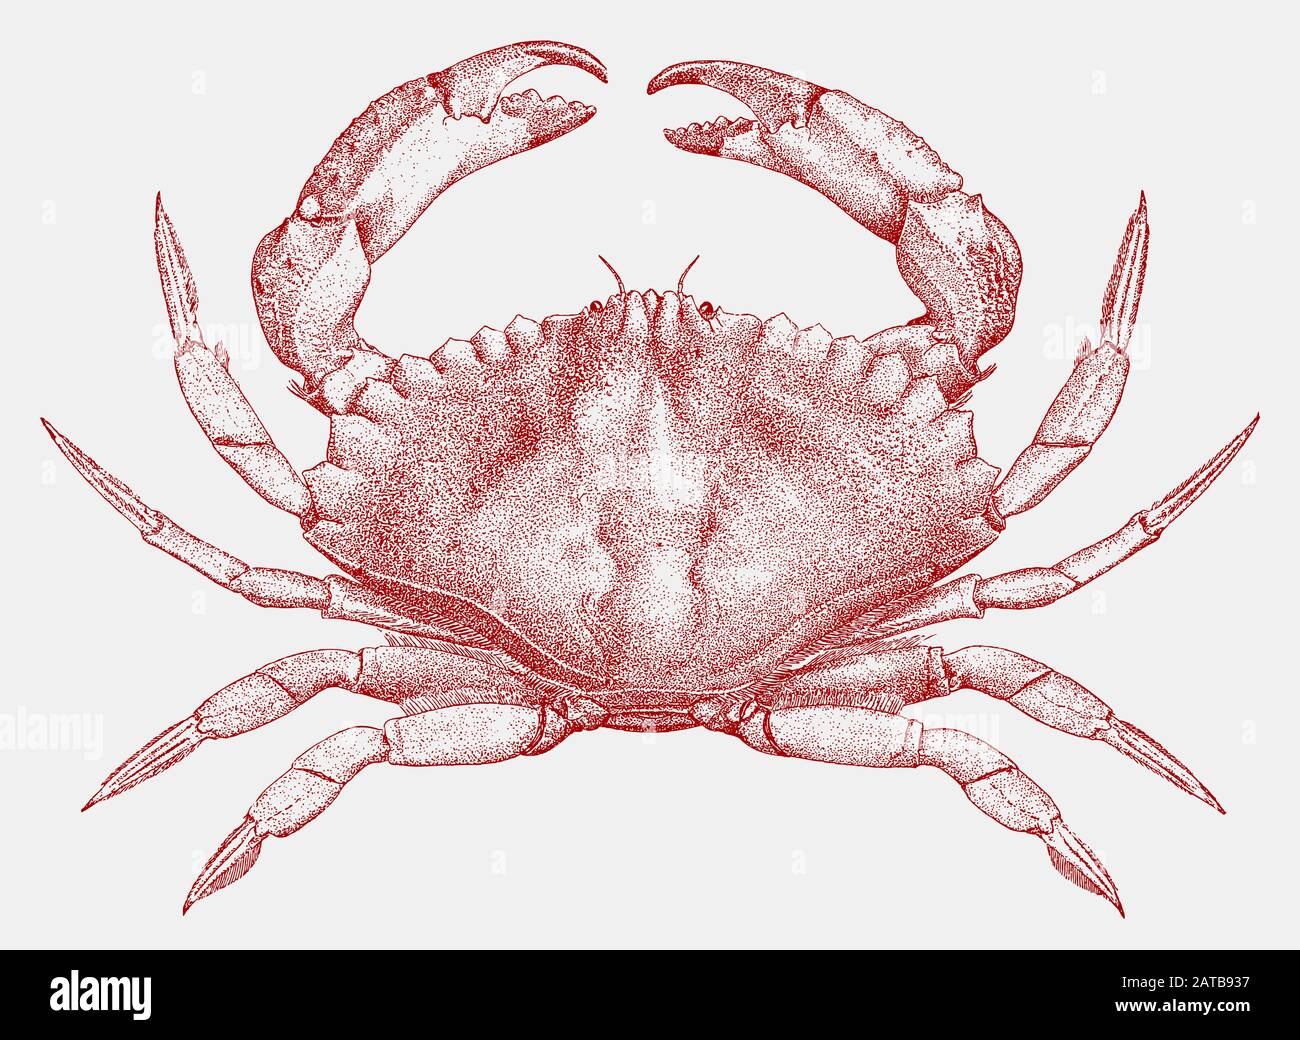 Red rock crab, cancer productus from the west coast of north america in top view Stock Vector